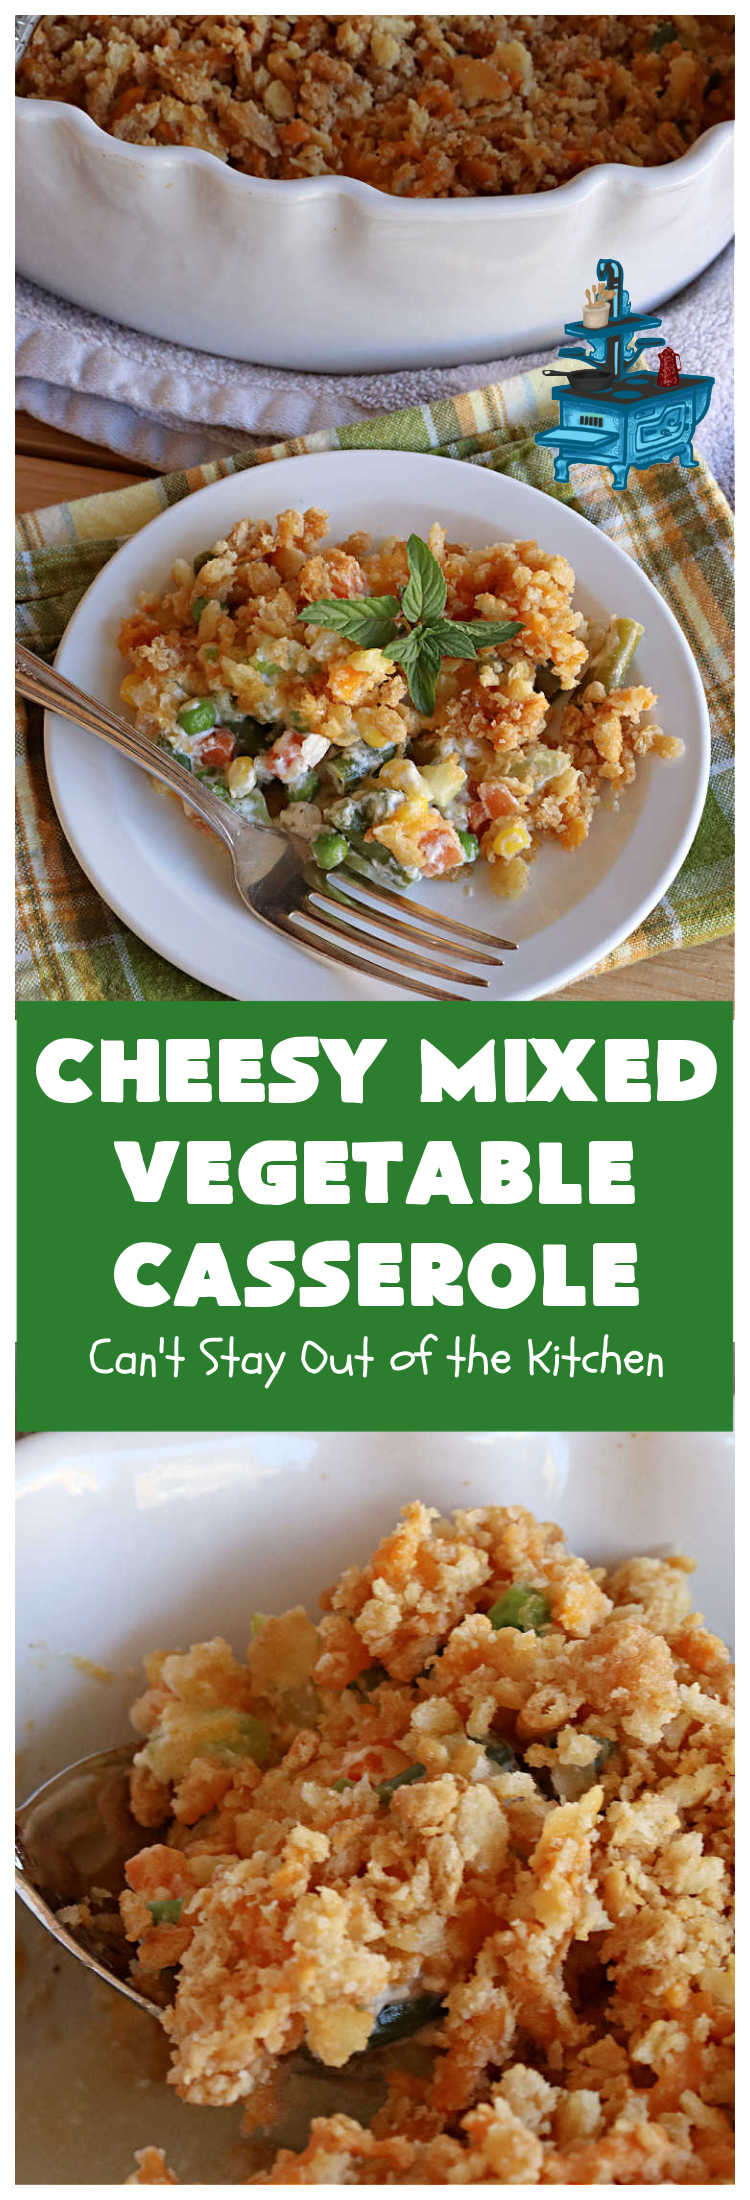 Cheesy Mixed  Vegetable Casserole | Can't Stay Out of the Kitchen | easy & delicious #SideDish that's terrific for company or #holiday dinners like #Thanksgiving or #Christmas. Uses #MixedVegetables in a casserole with a delightful #CheddarCheese #RitzCracker crumb topping. #casserole #CheesyMixedVegetableCasserole